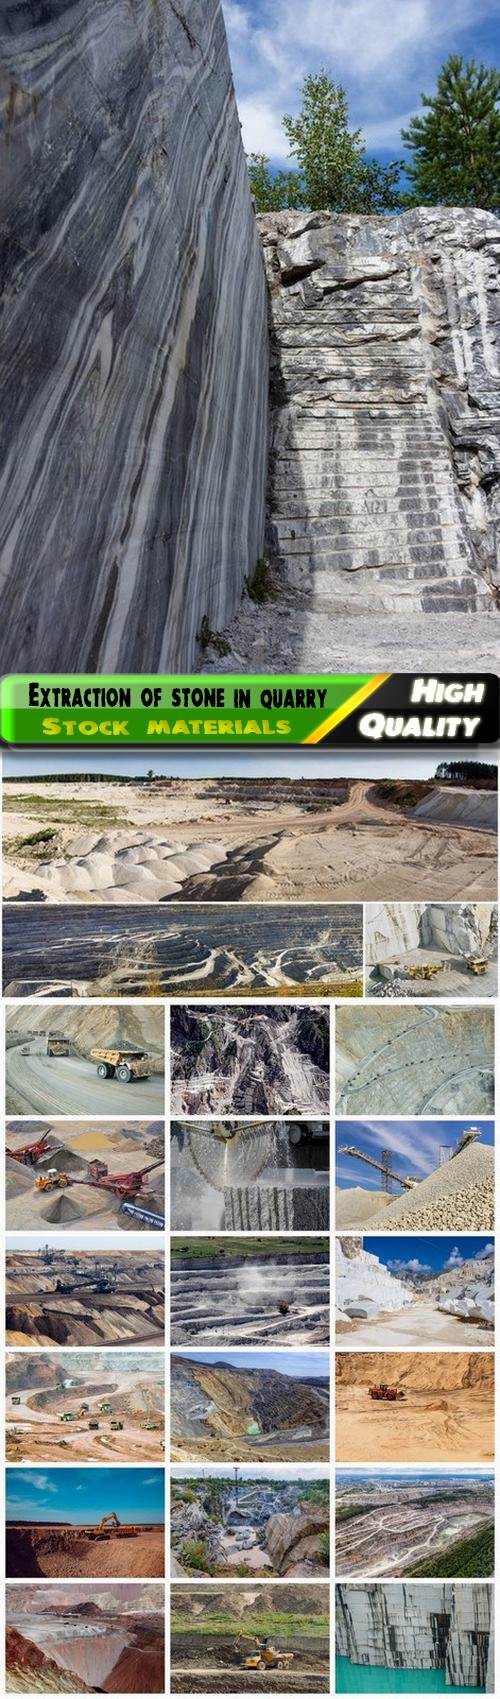 Extraction of stone in quarry and mining machinery 25 HQ Jpg